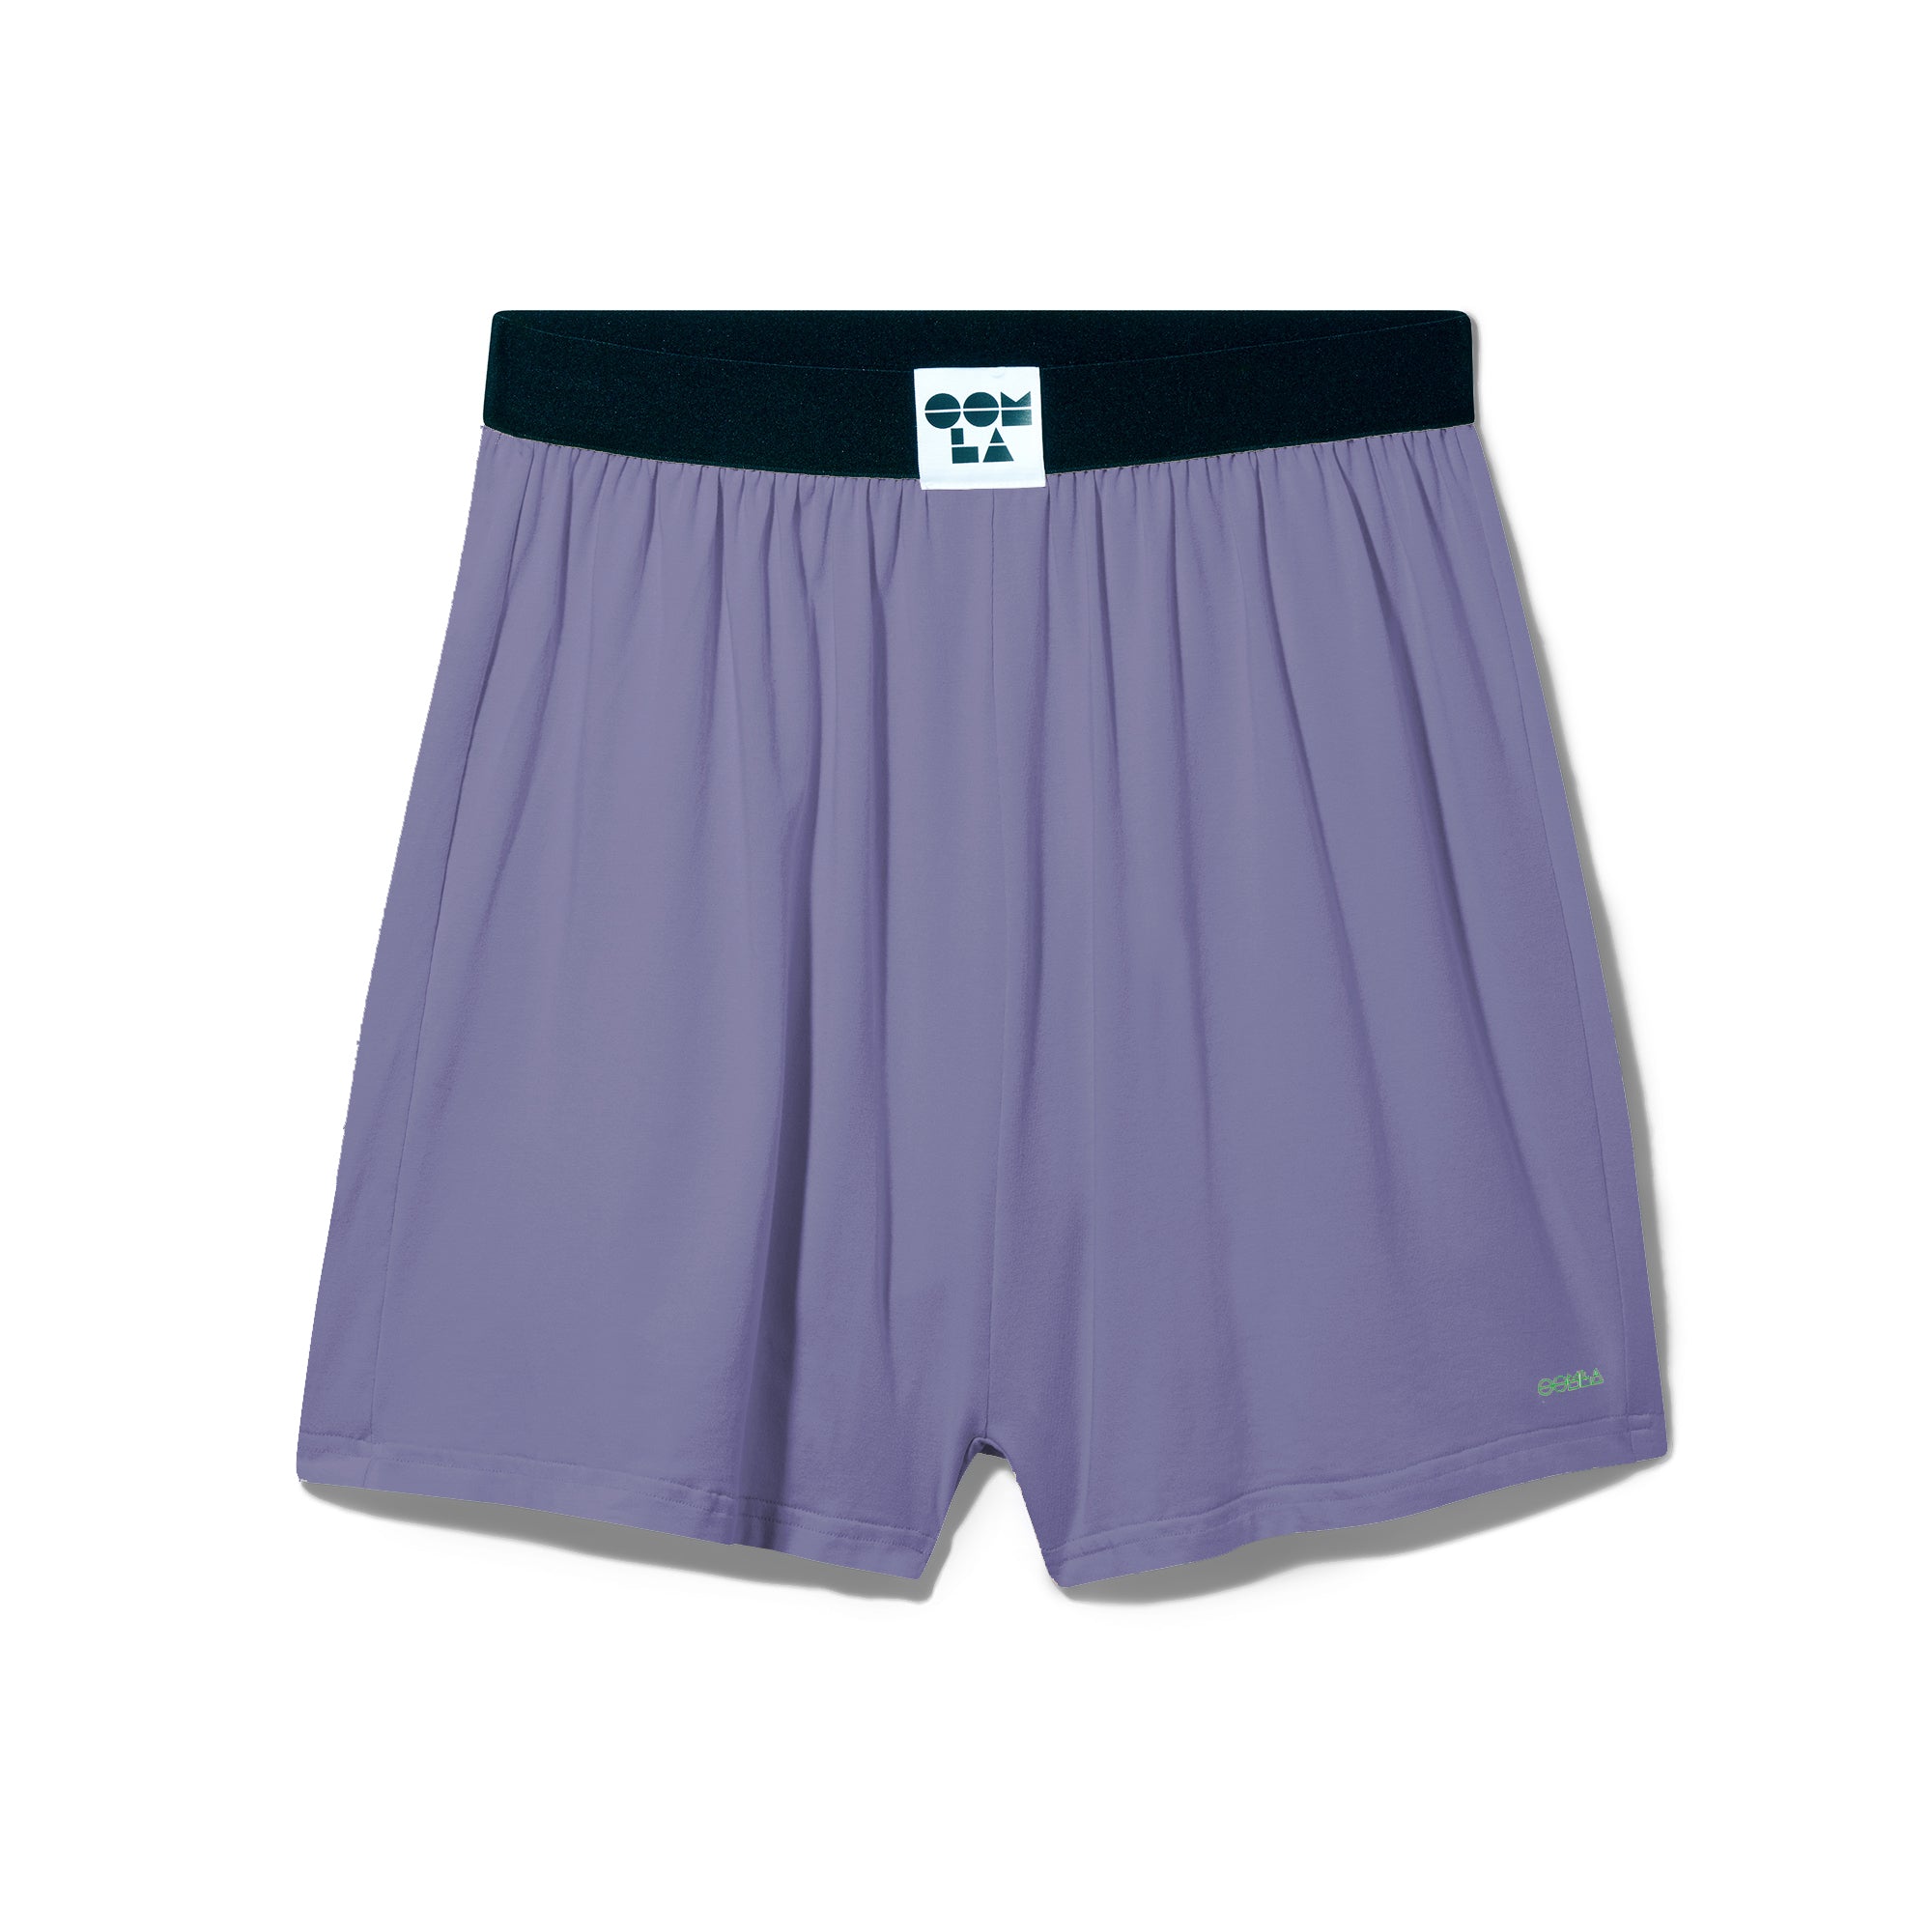 Lilac OOMSHORTS